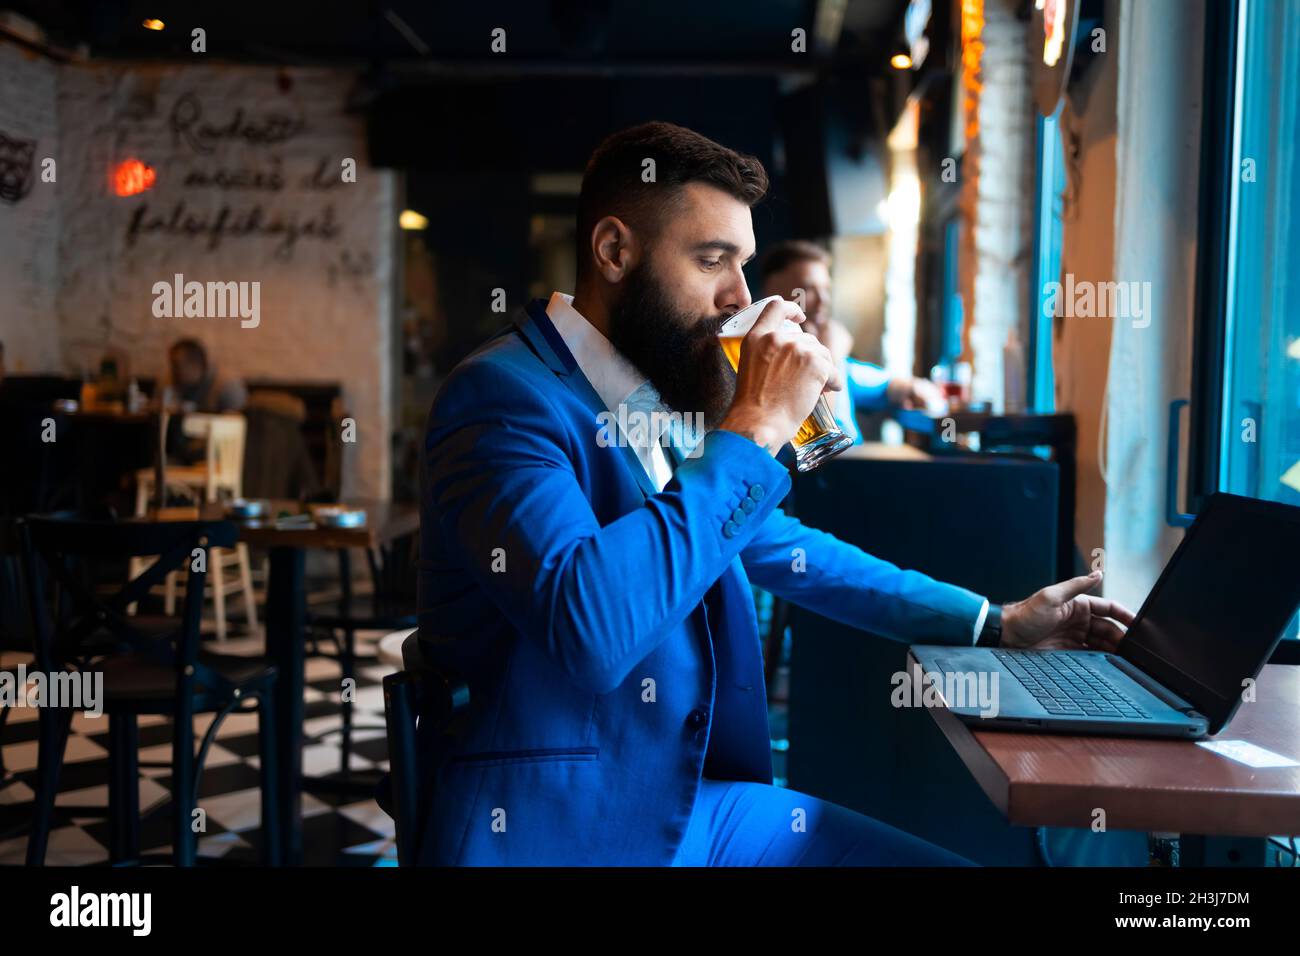 A businessman with a laptop drinking beer in a pub Stock Photo